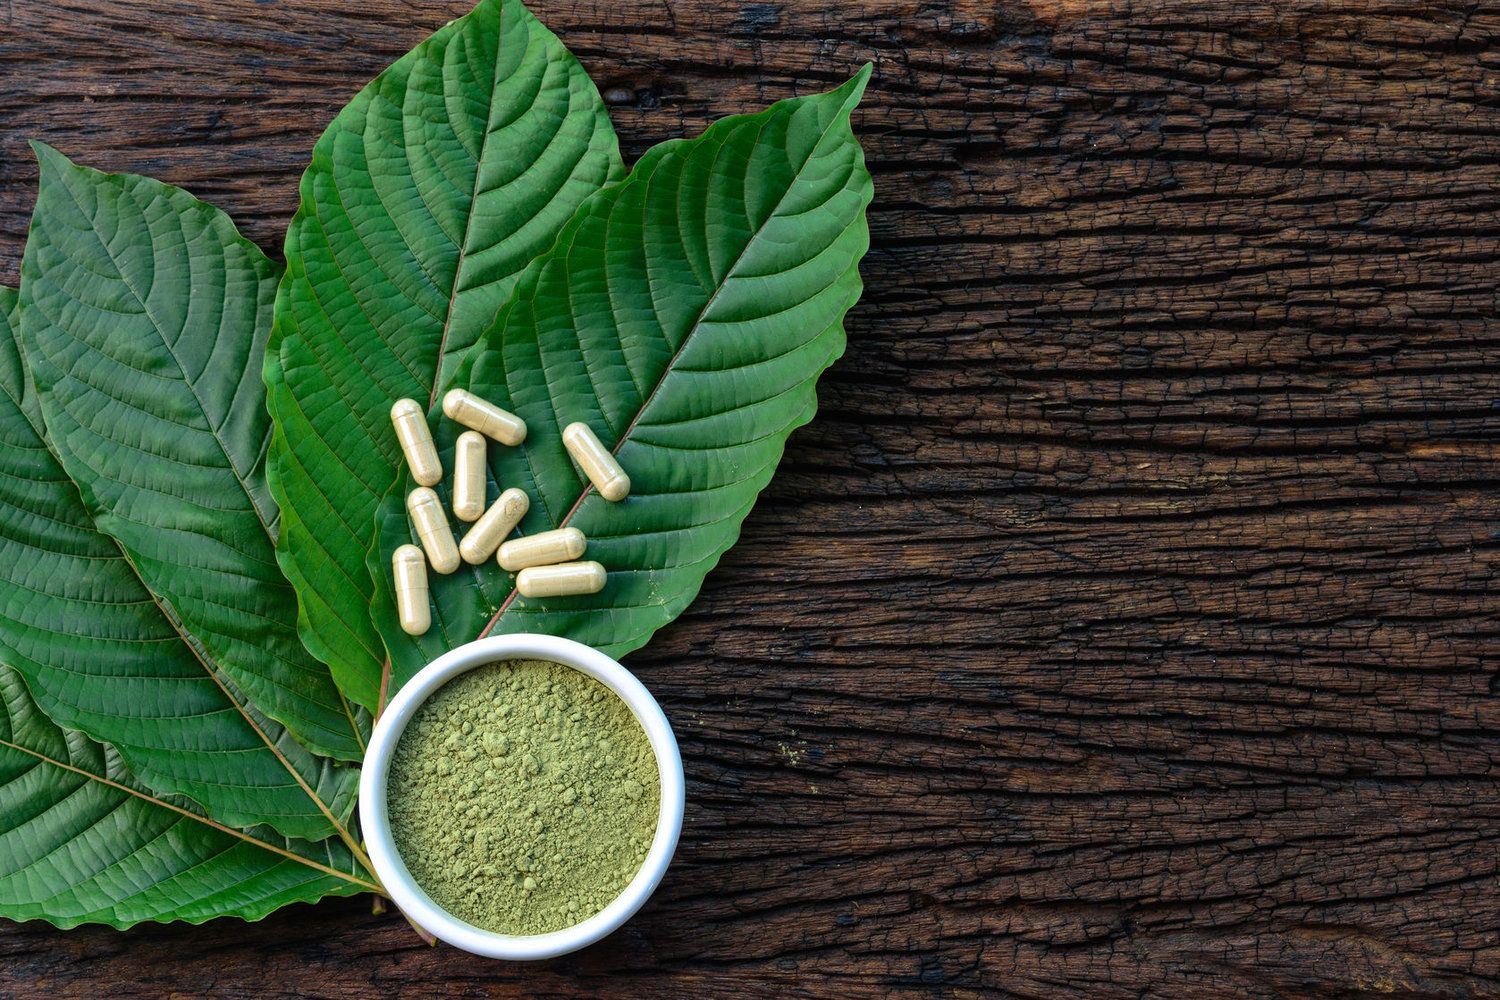 Kratom Extract vs. Powder: What's the Difference?